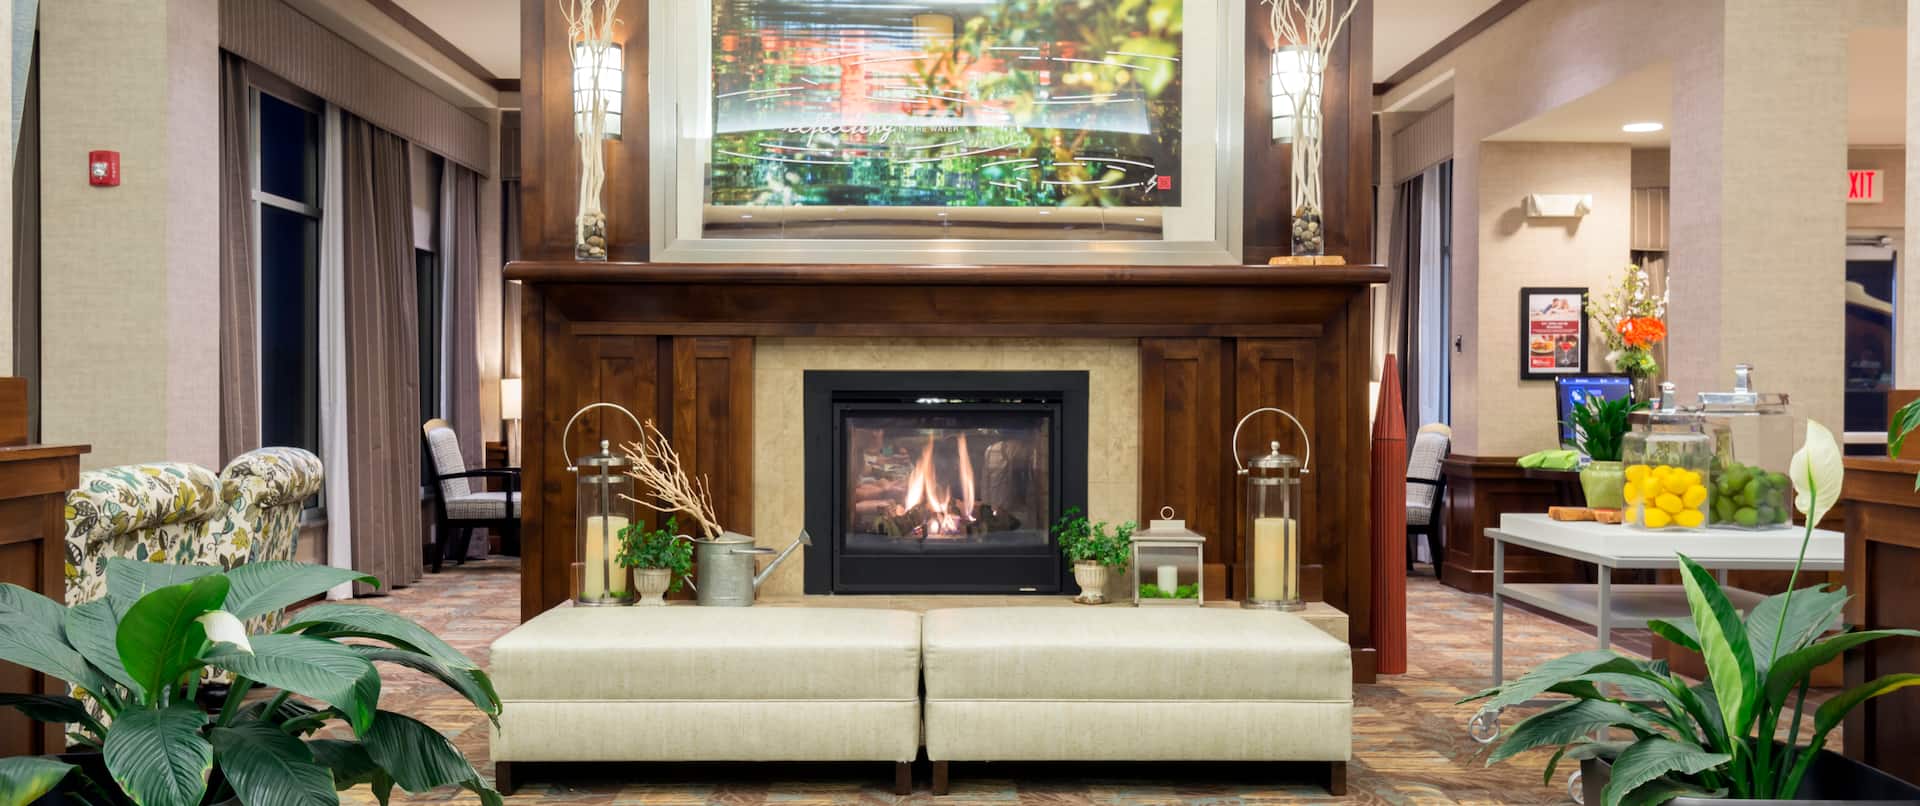 Lobby Fireplace and seating